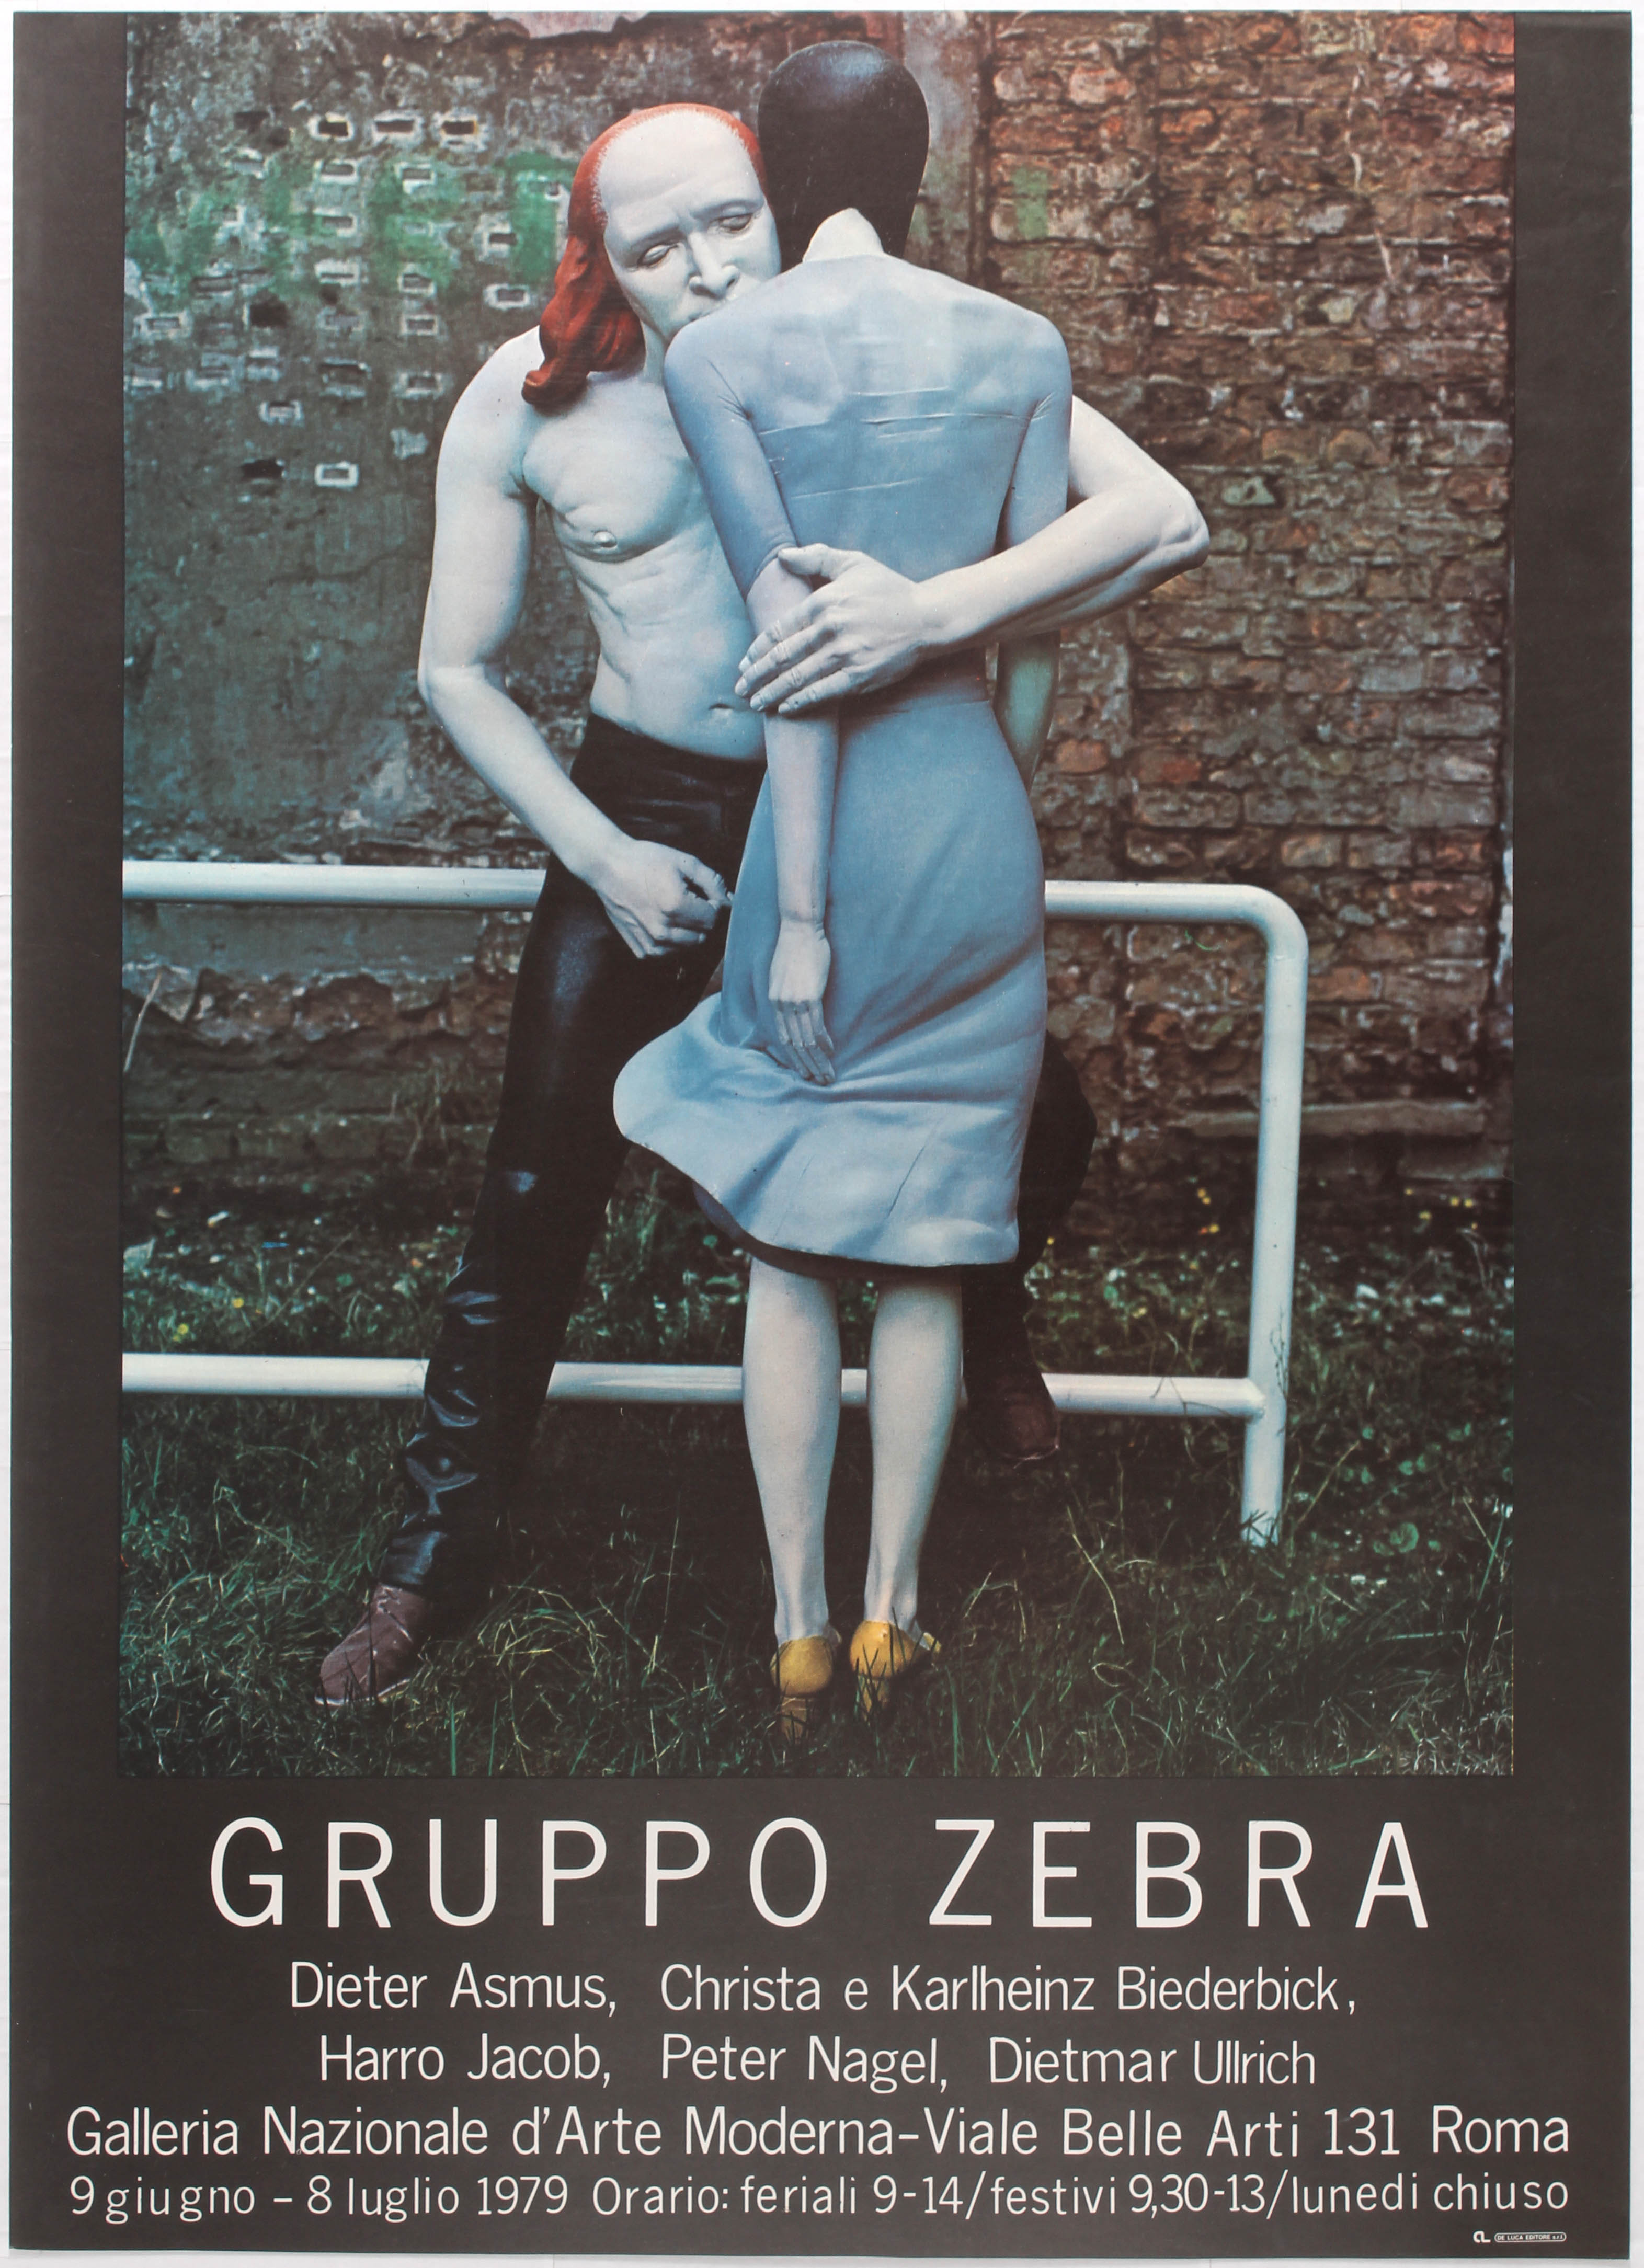 Art Exhibition Poster Surrealism Lousiana Peter Nagel Gruppo Zebra Scuptures Venice and Bysantine - Image 5 of 5